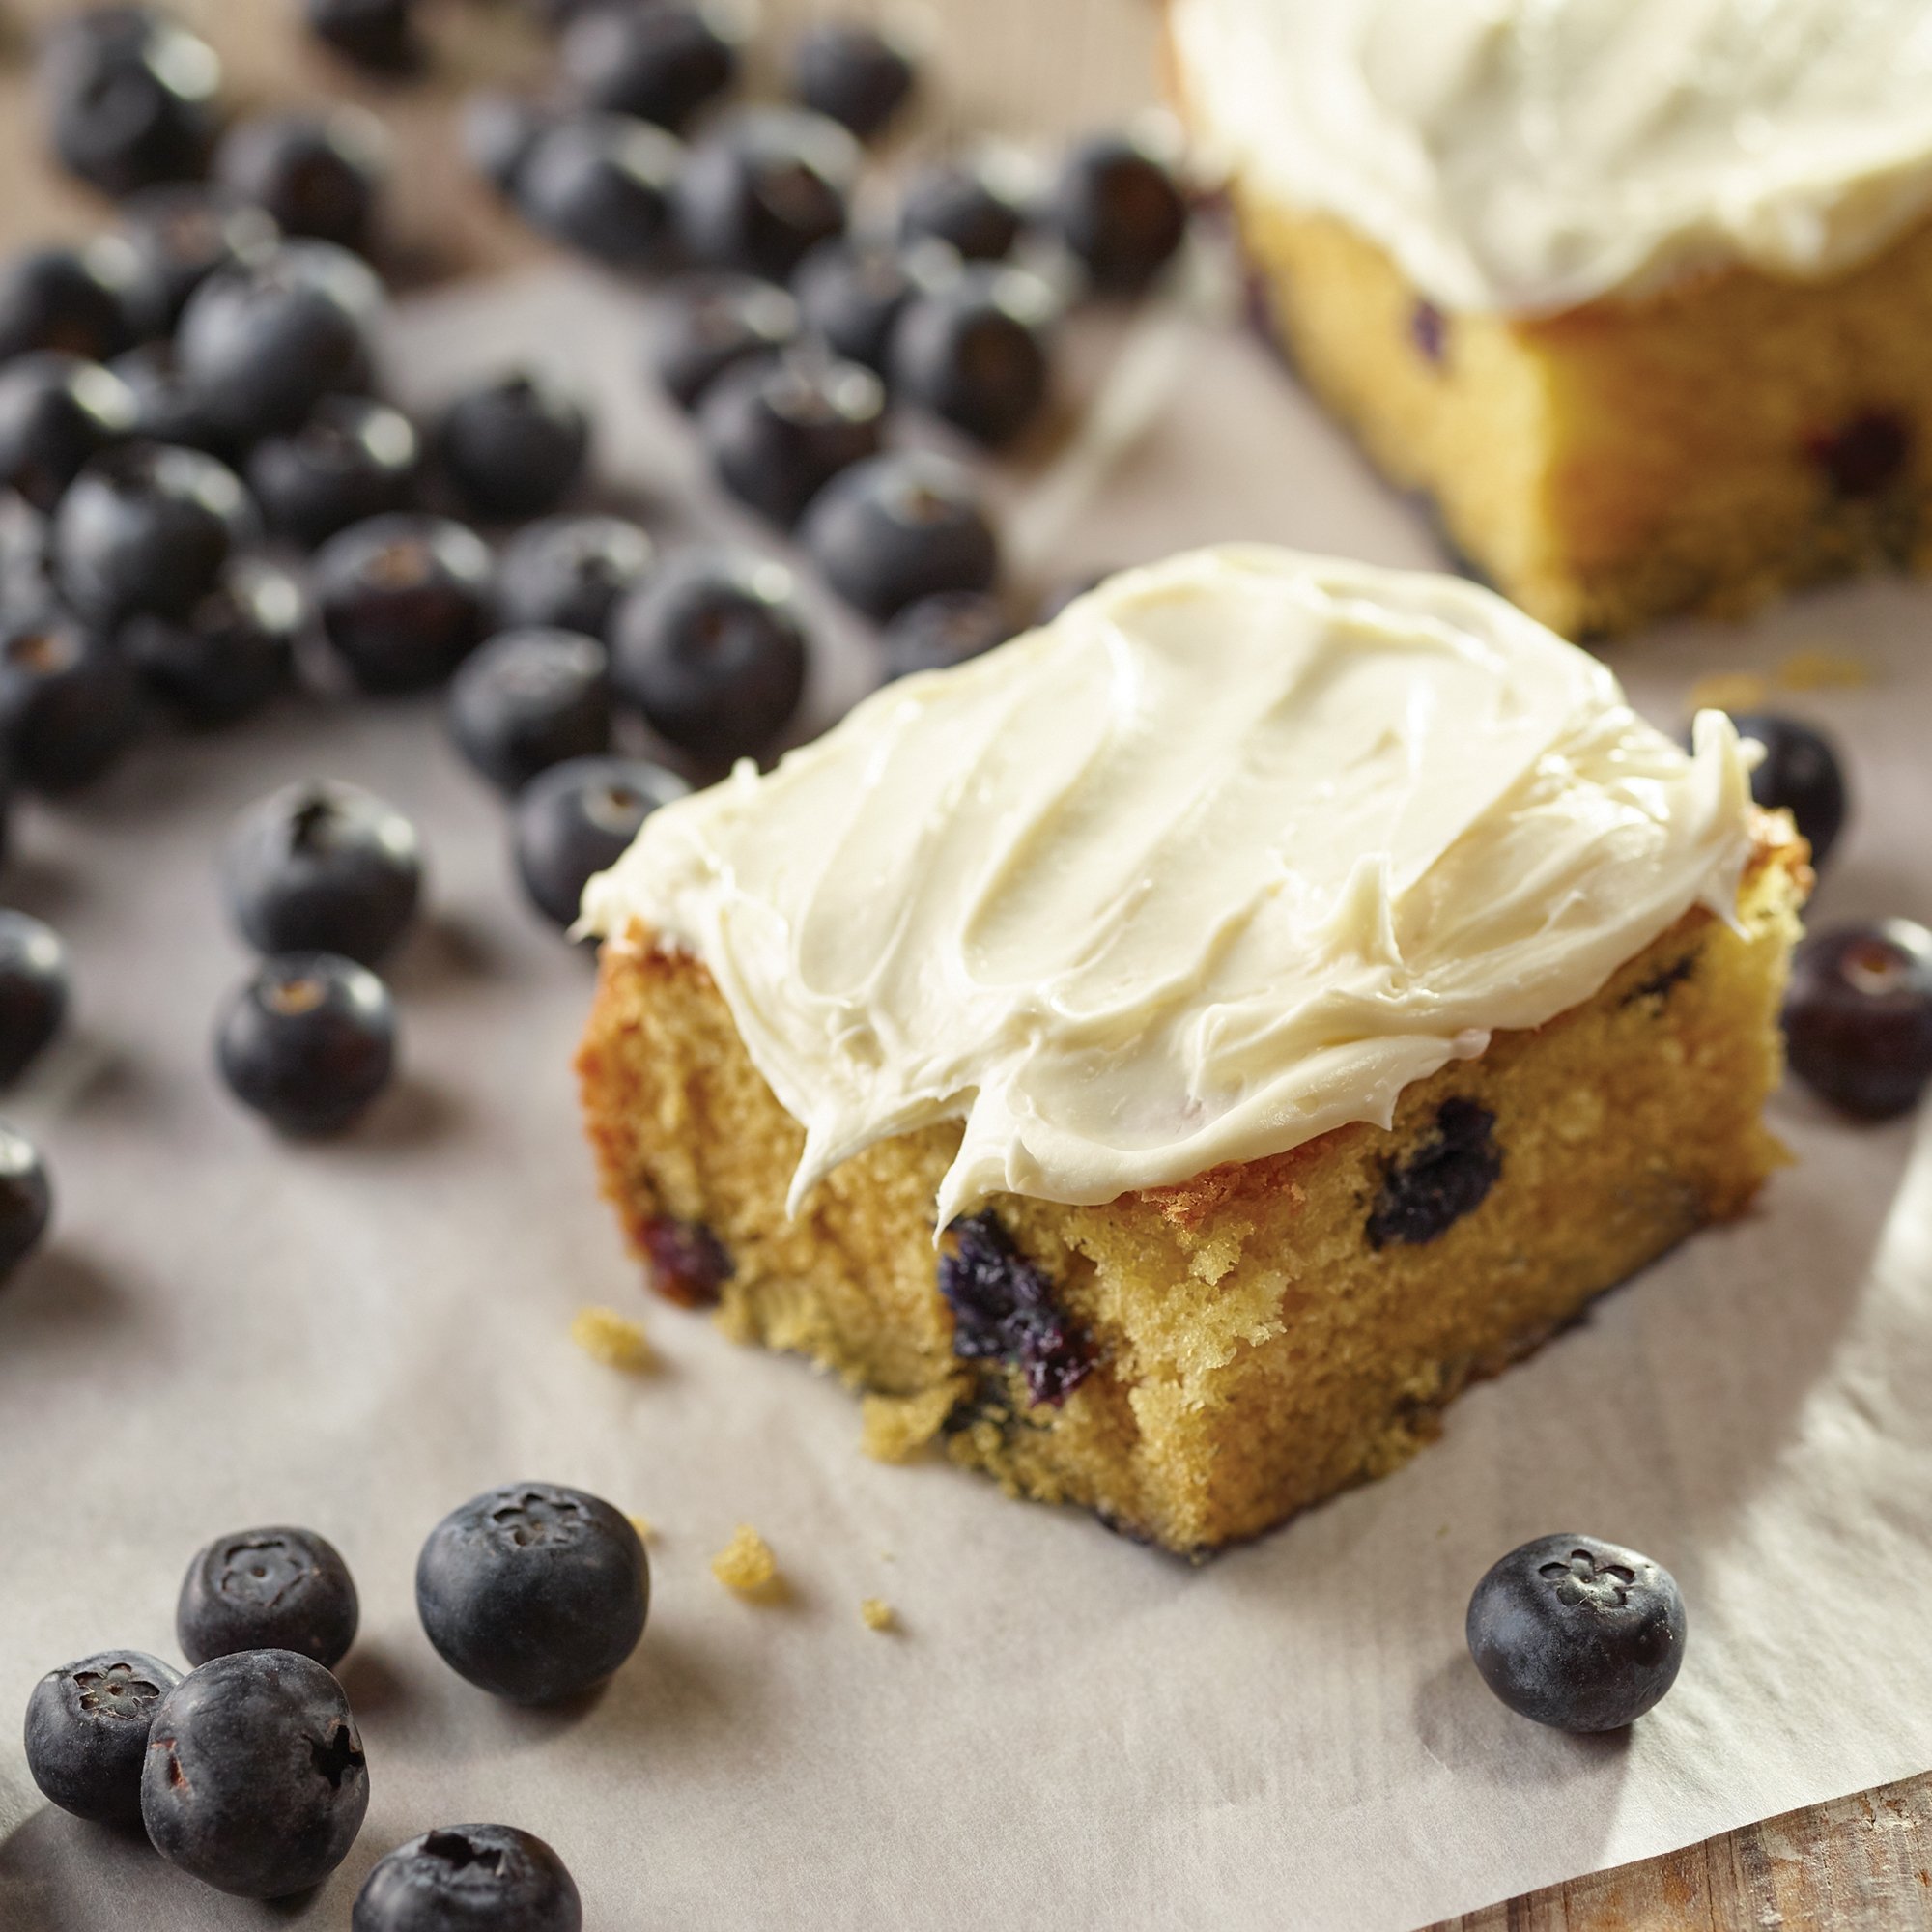 BLUEBERRY CREAM CHEESE BUTTER CAKE - The Southern Lady Cooks